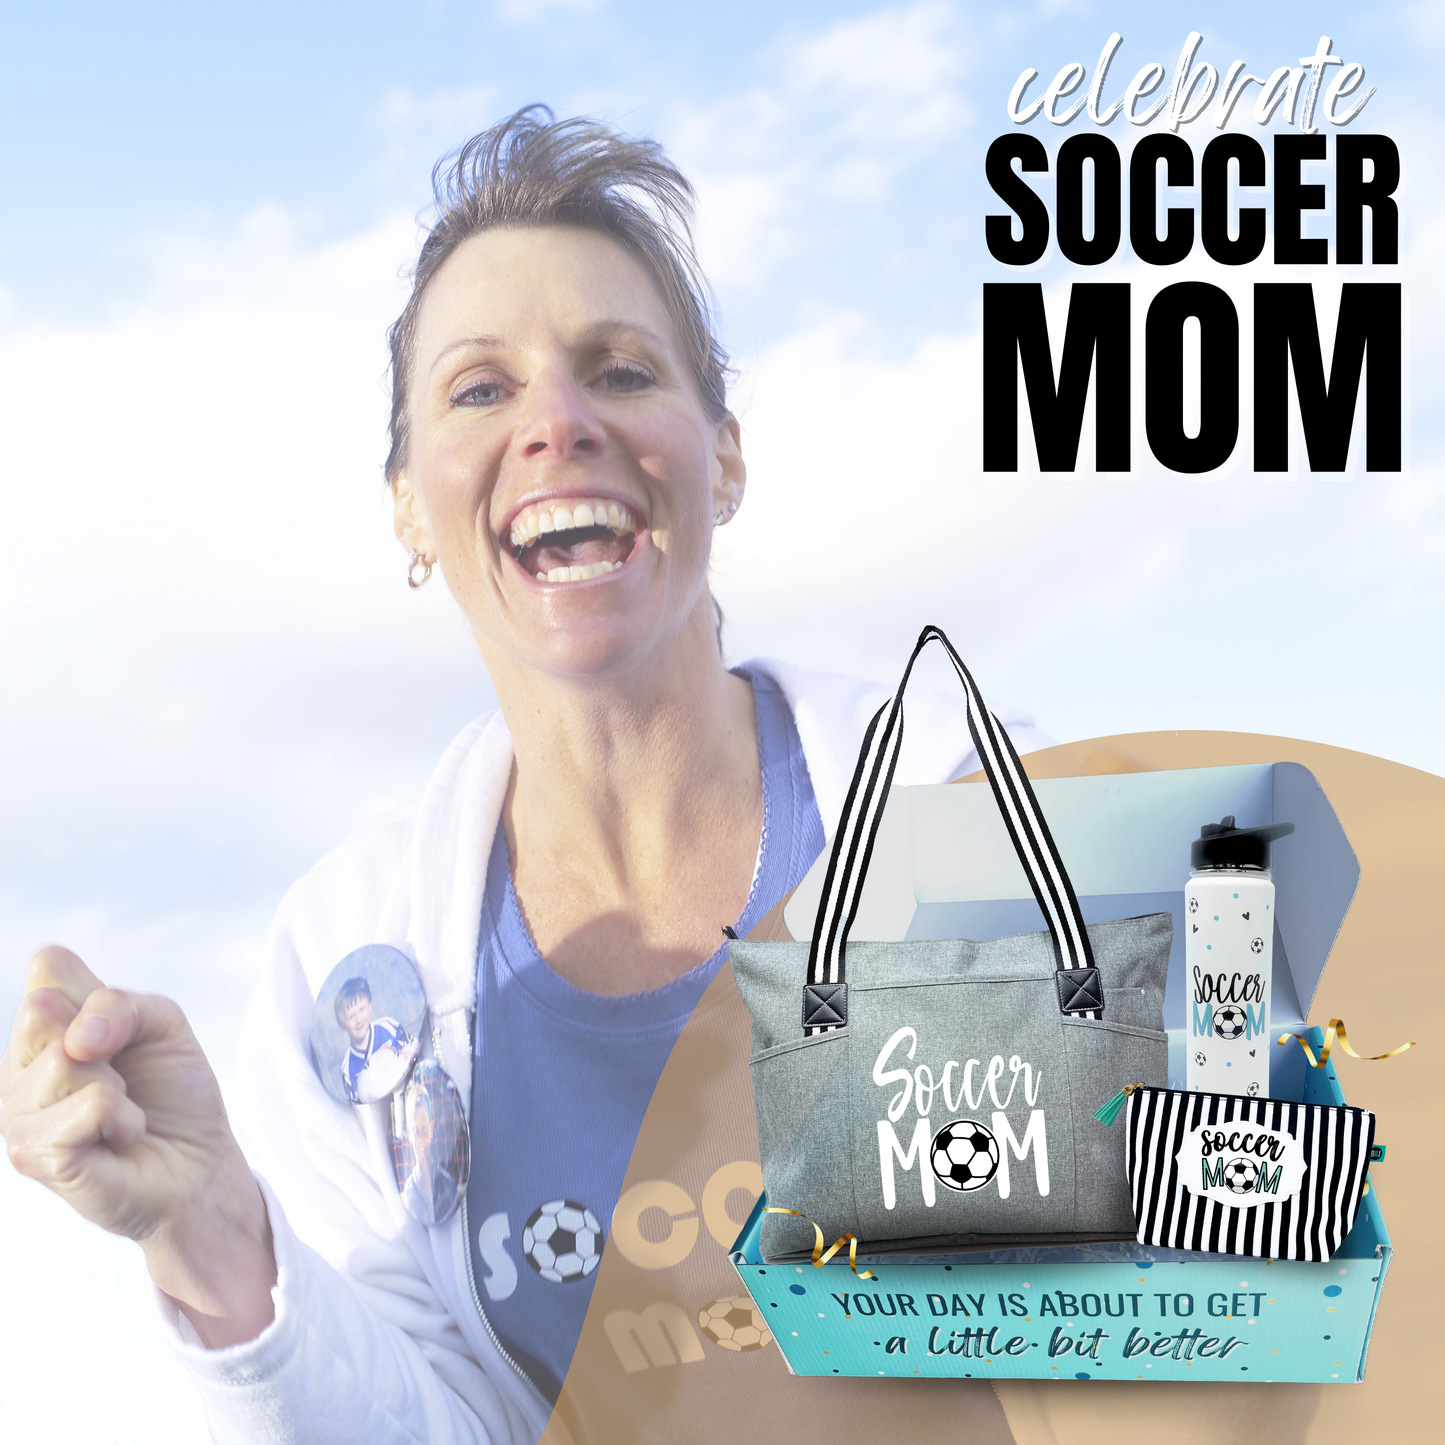 Brooke and Jess Designs - Soccer Mom Tessa Black Tote Bag, 24 oz Waterbottle Tumbler, and Janie Makeup Cosmetic Bag Gift Box Set